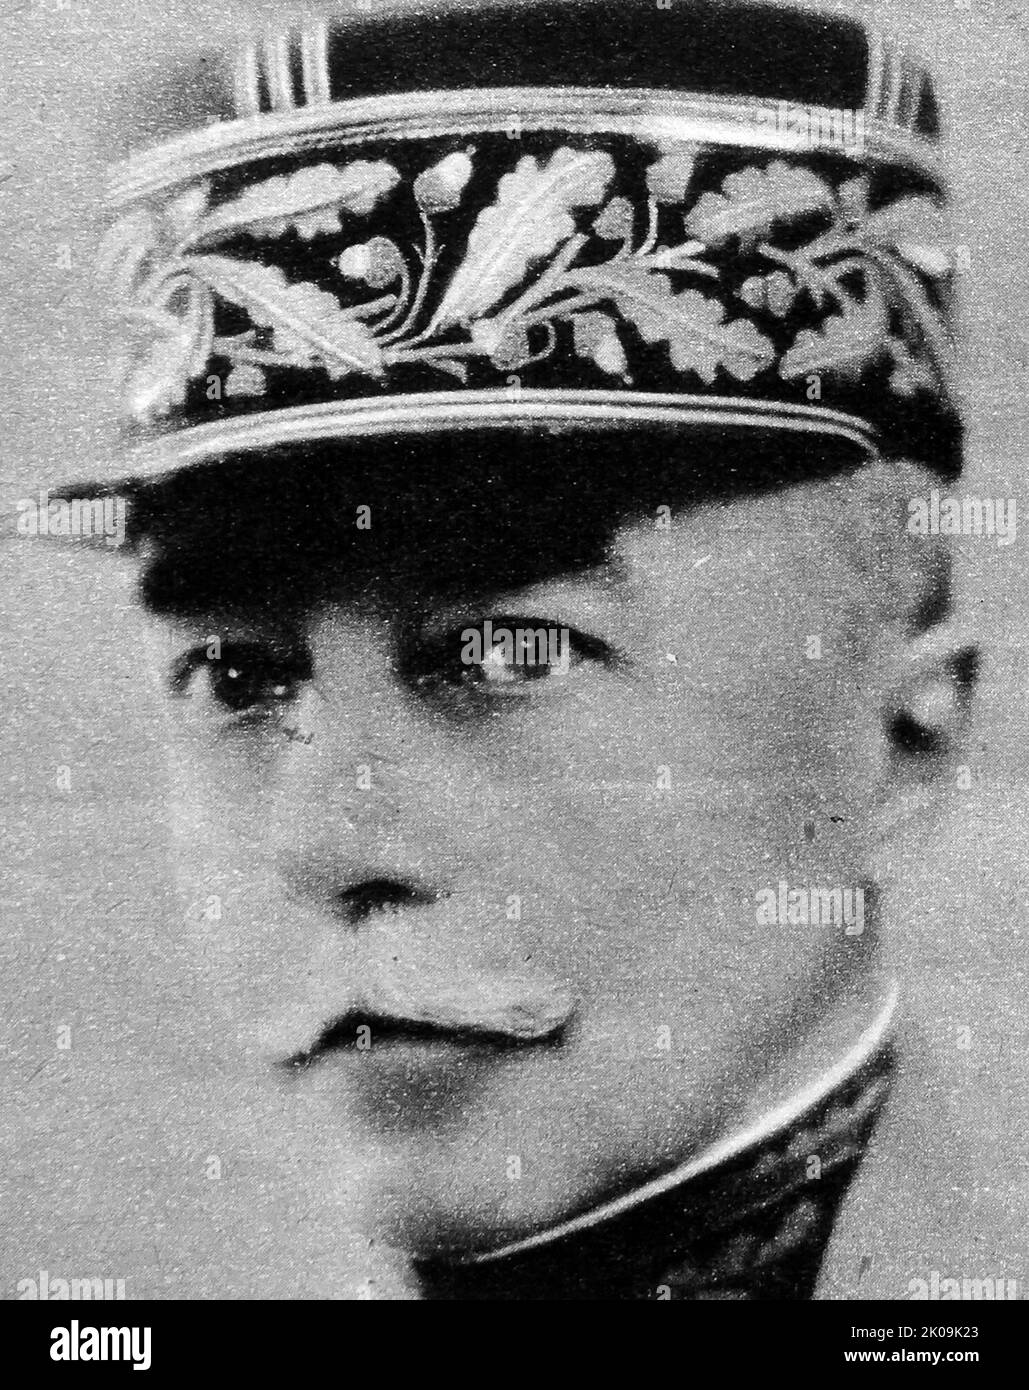 General Coulson, French Minister of War, General Gamelin's closest collaborator and personal assistant to Marshal Petain at close of World War II. Stock Photo